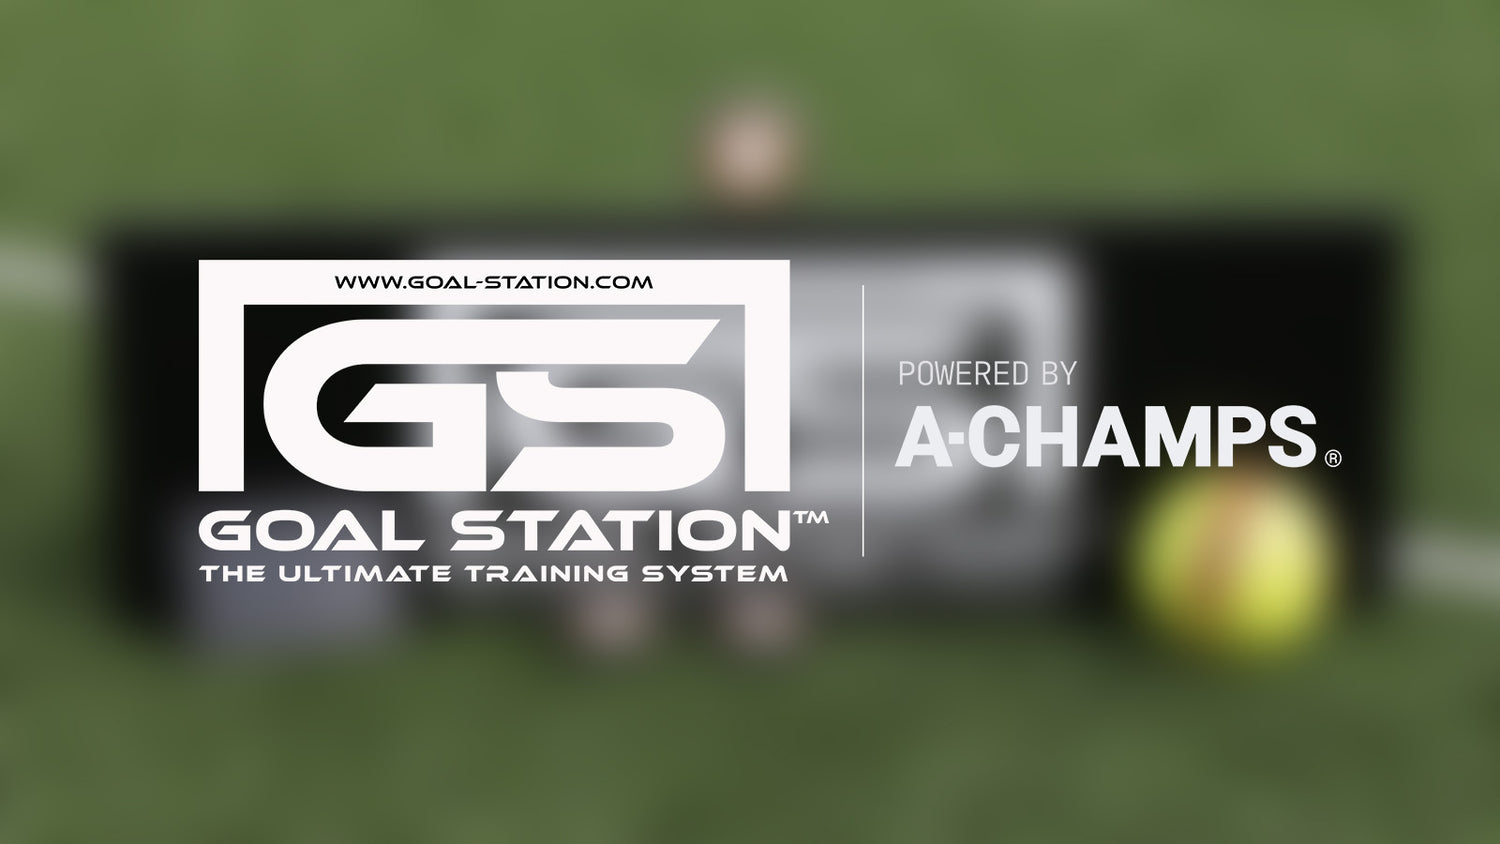 Goal station powered by a-champs for soccer training